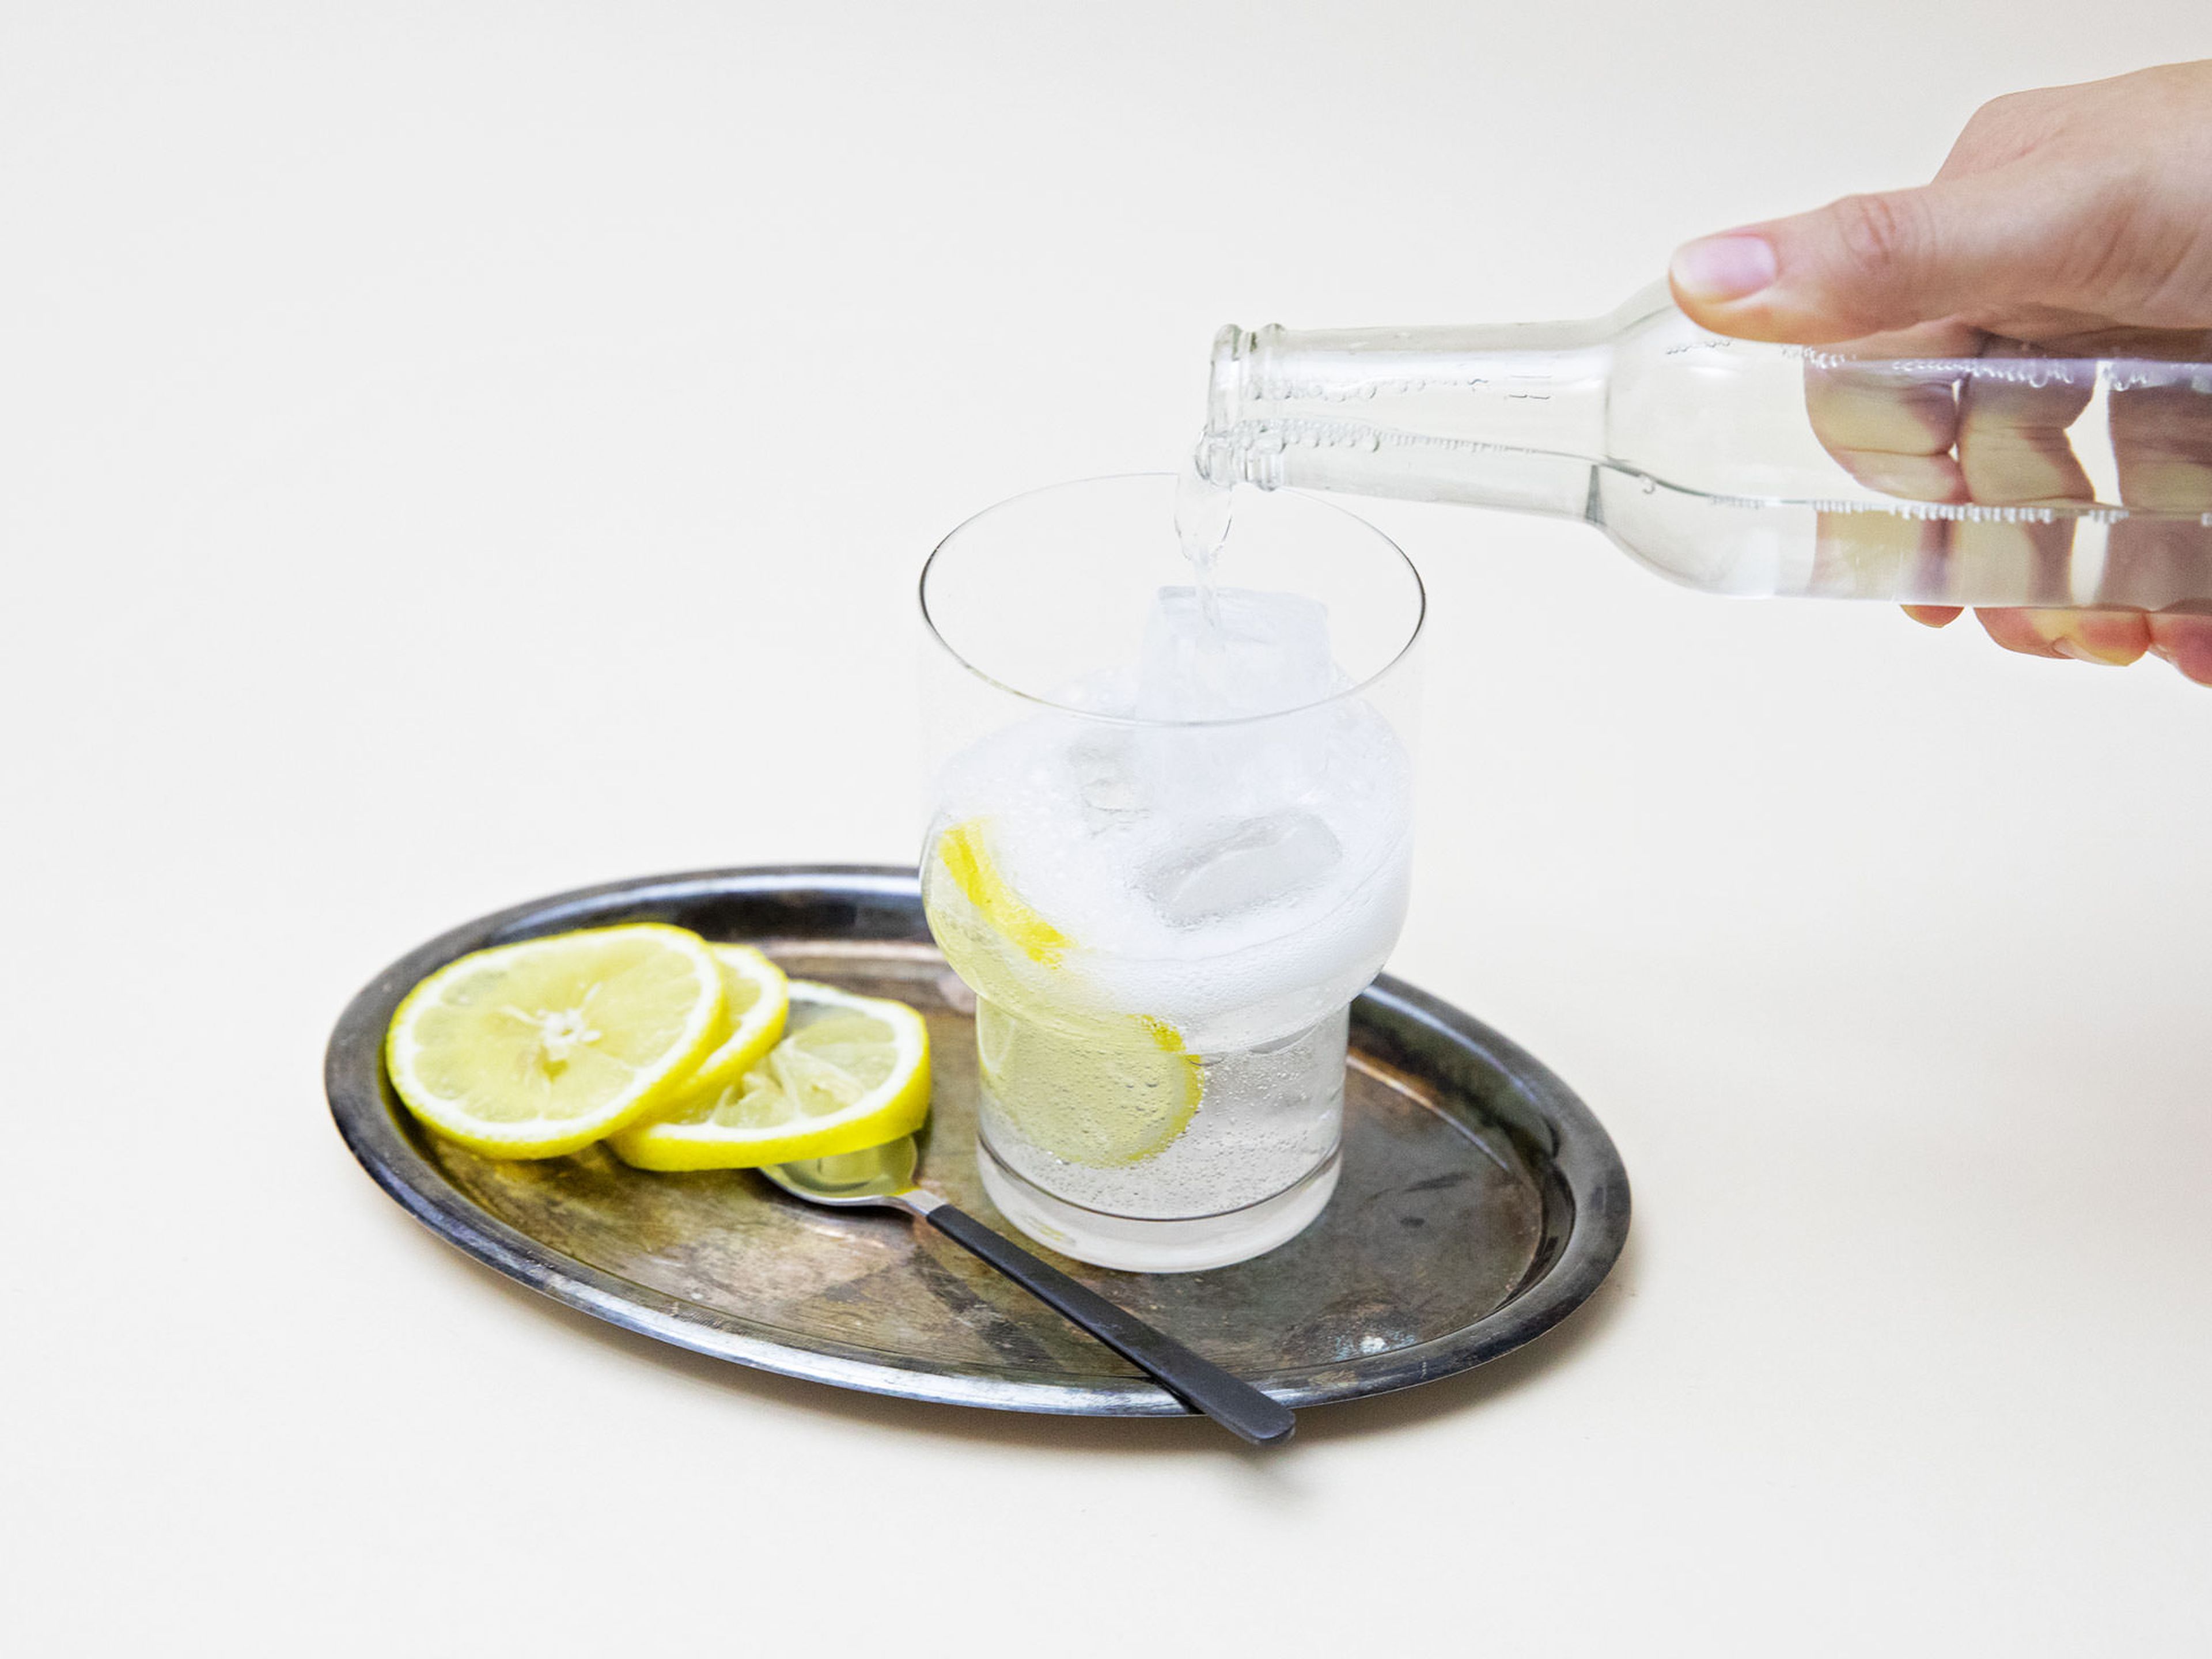 Place ice in a glass, pour in the tonic water, ginger syrup, and espresso, and garnish with a slice of lemon. Enjoy!